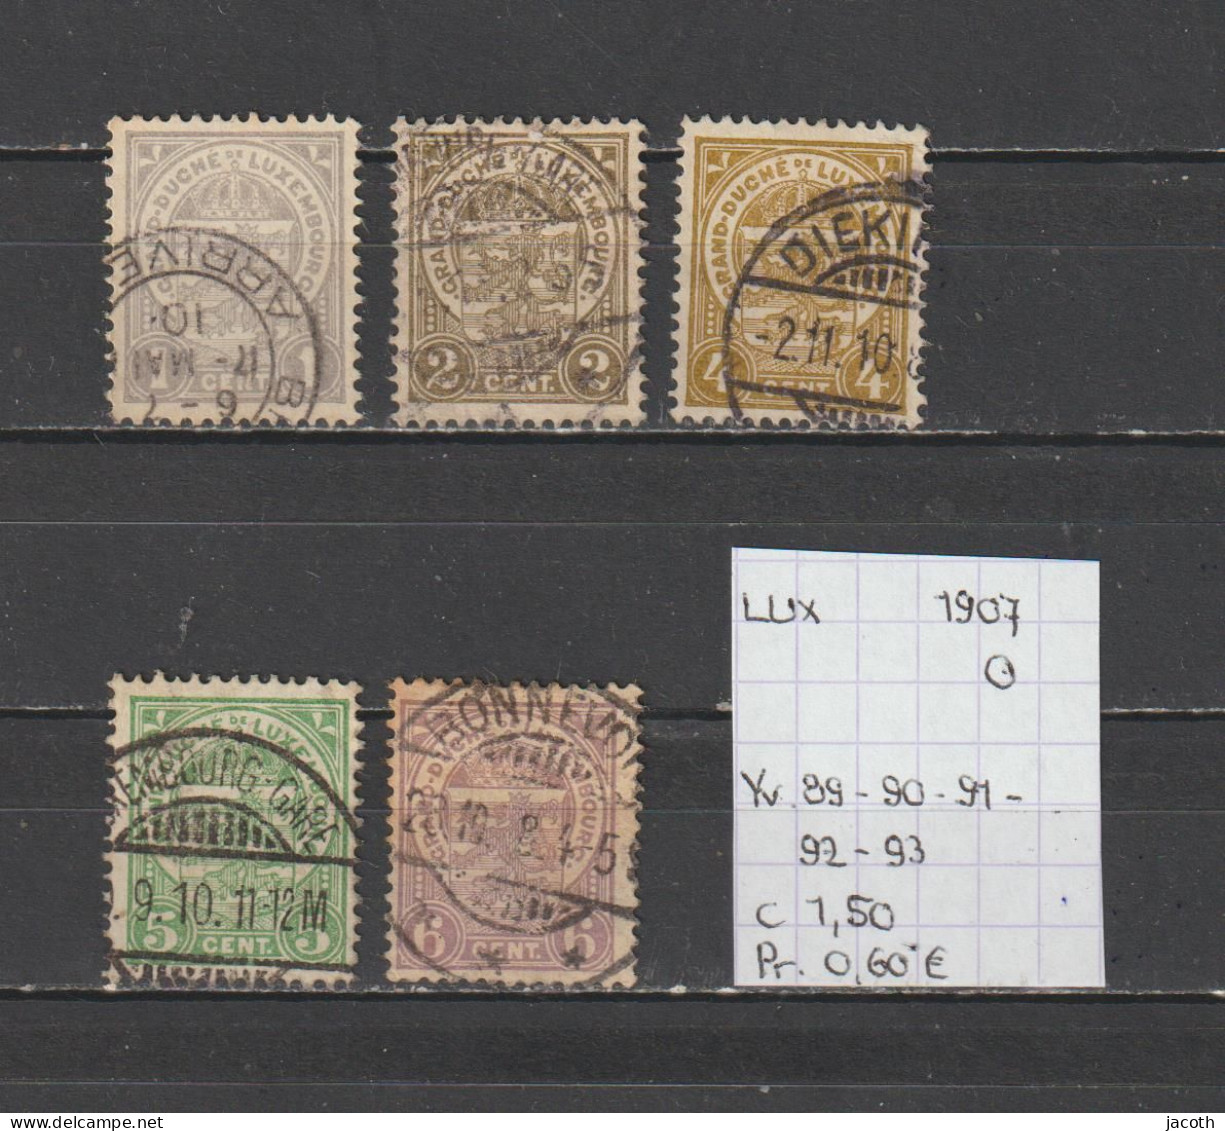 (TJ) Luxembourg 1907 - YT 89 + 90 + 91 + 92 + 93 (gest./obl./used) - 1907-24 Coat Of Arms